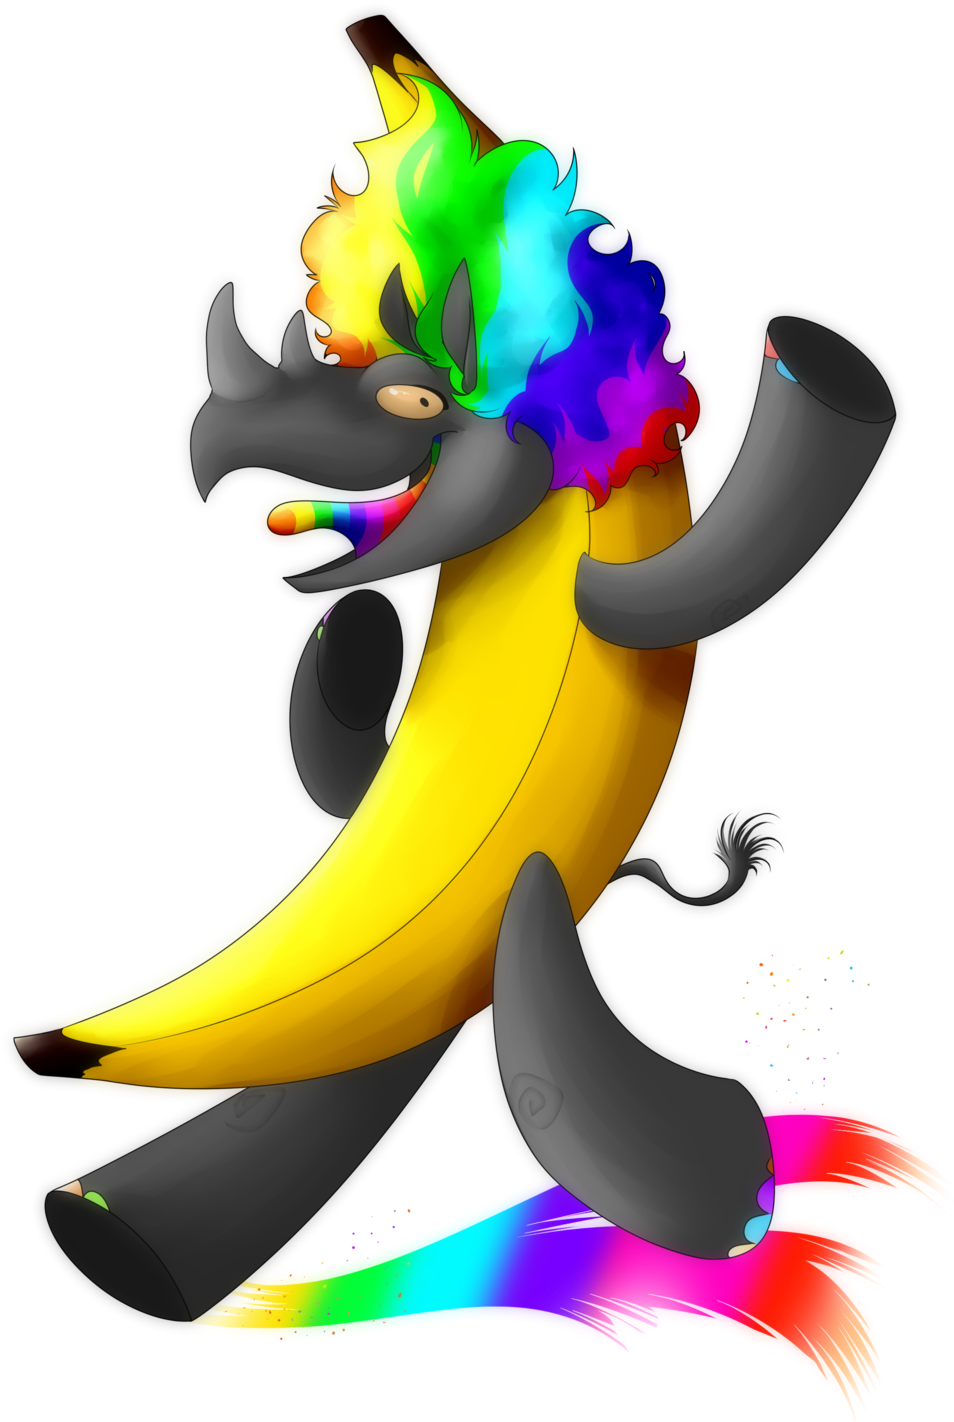 Rhino In A Banana Suit With A Rainbow Afro By Feisucakester - Banana Rhino (1024x1536)